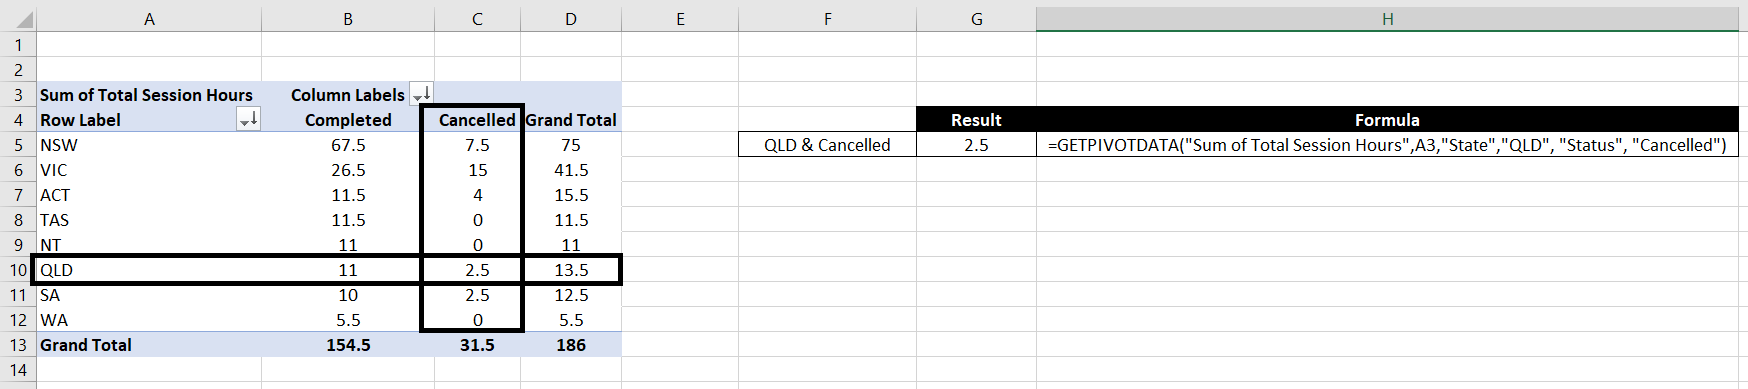 getpivotdata-table-specific-row-column